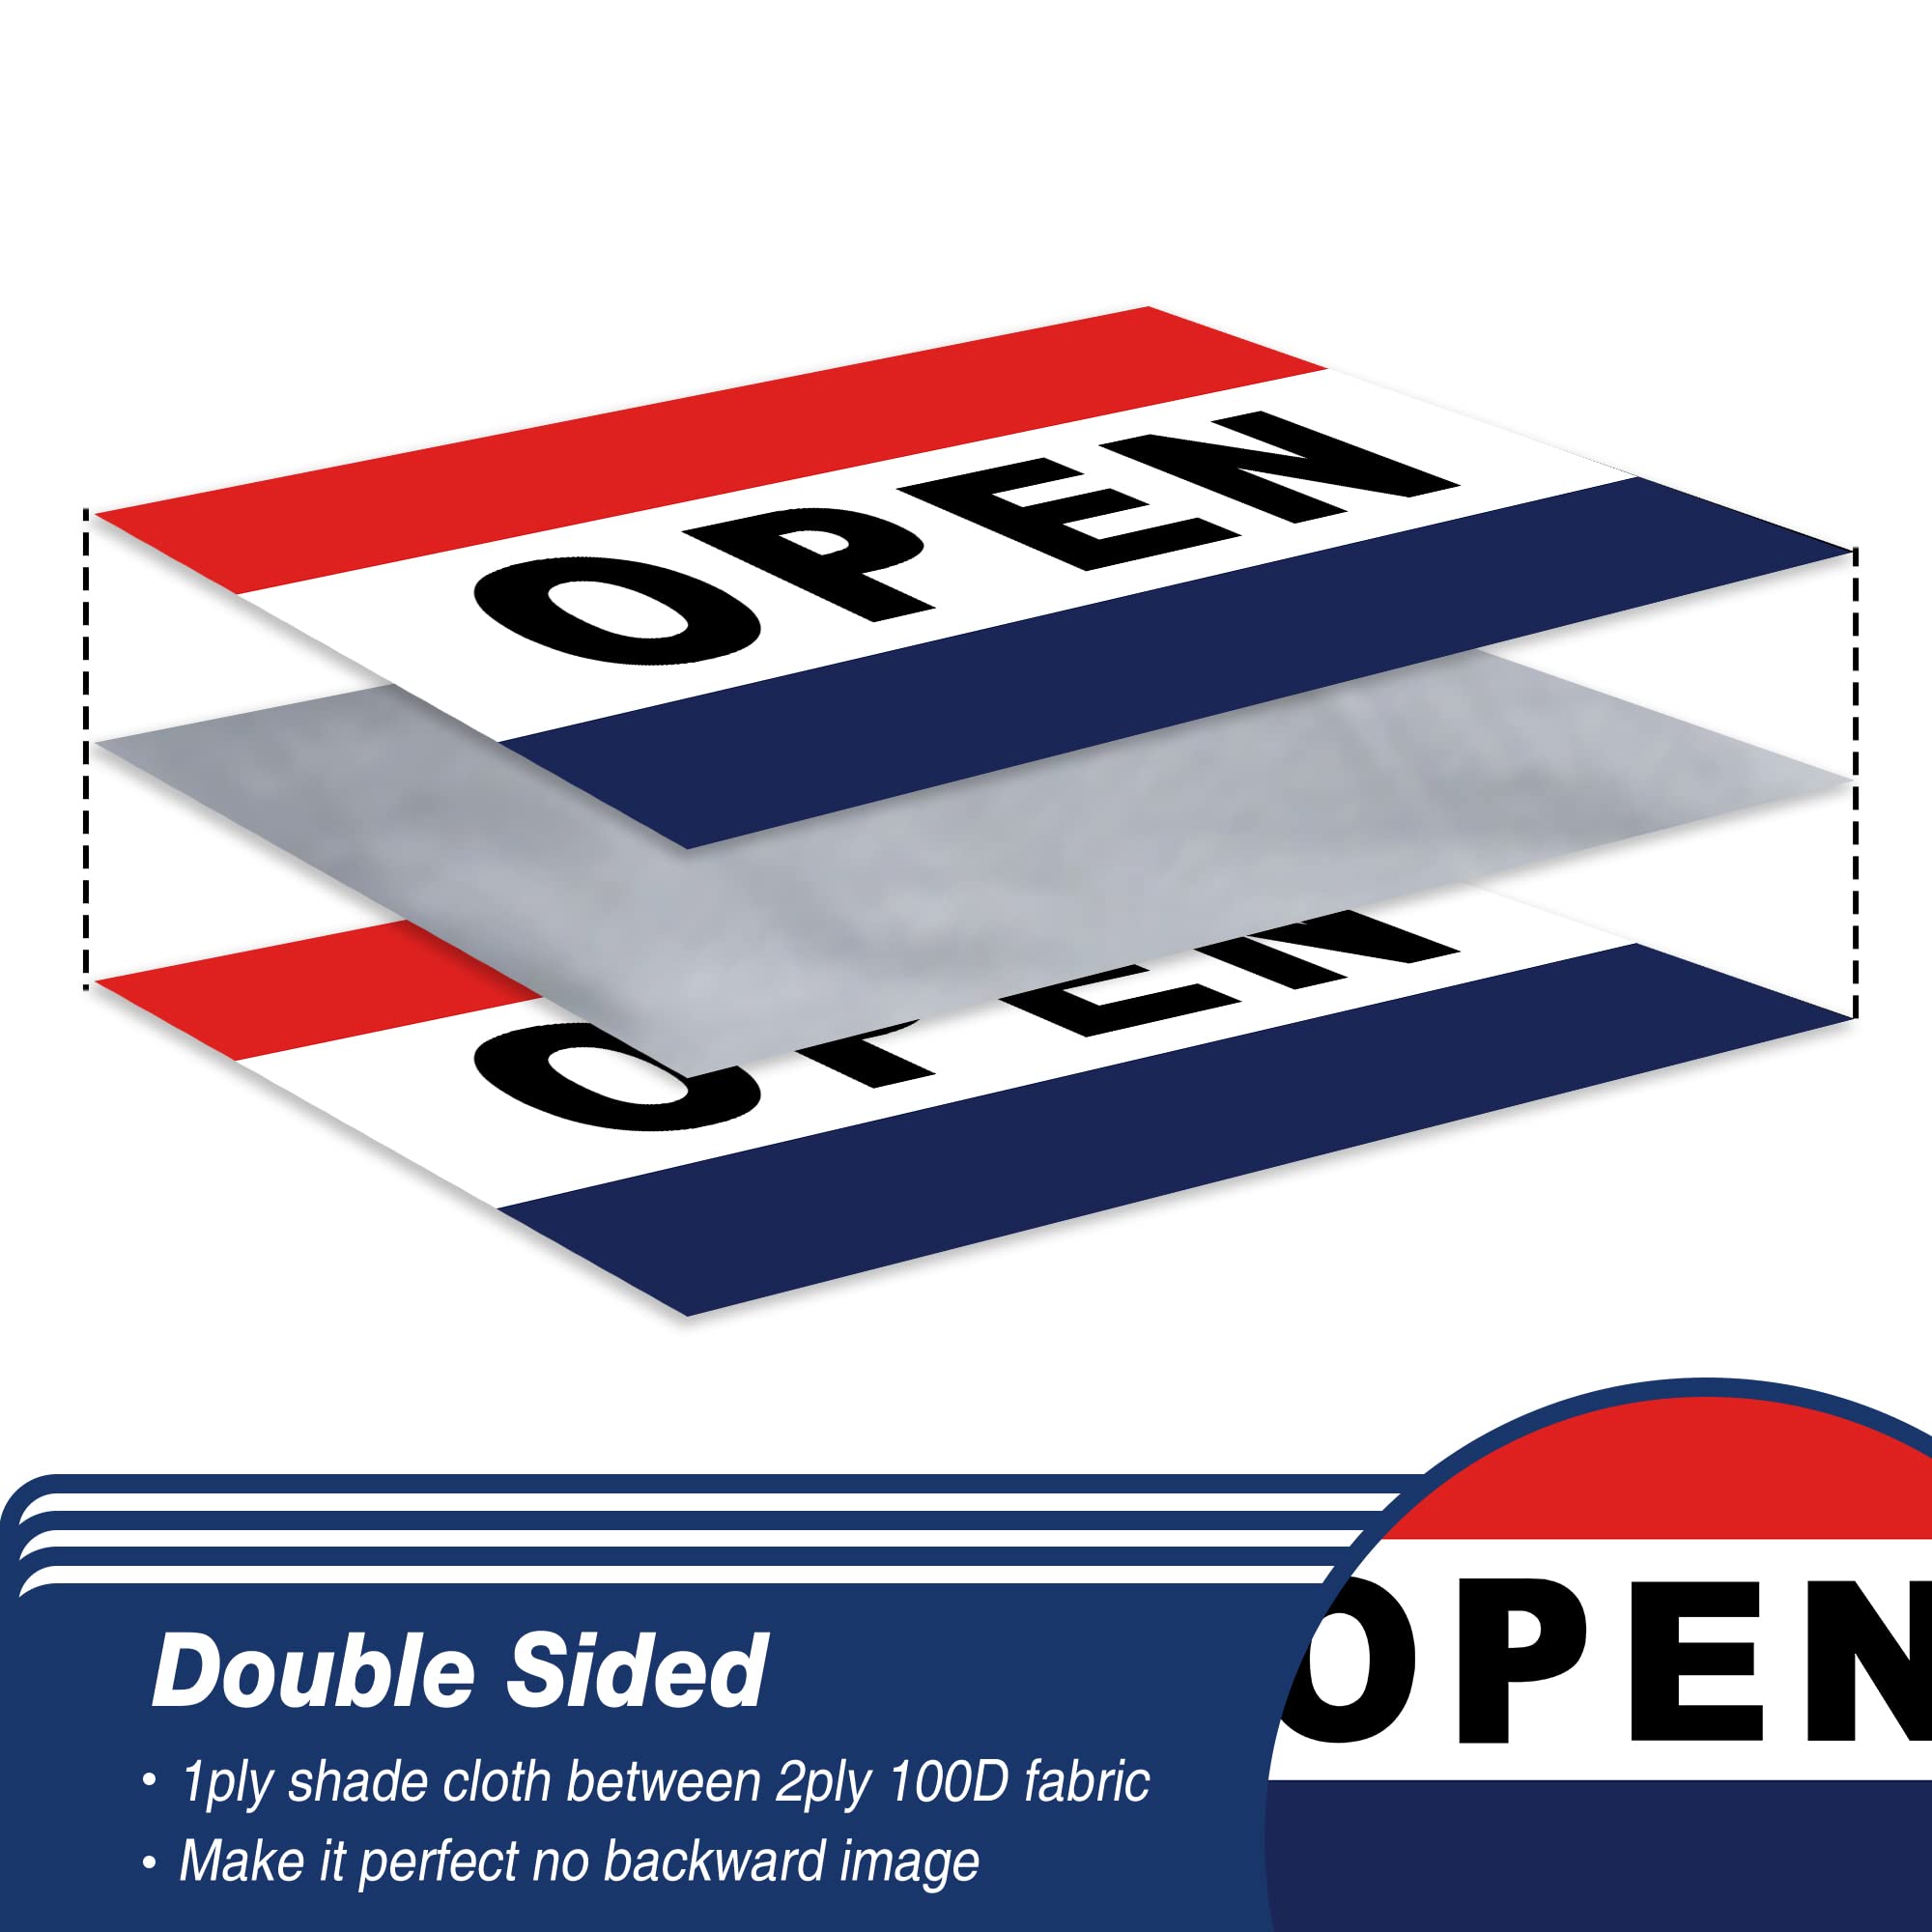 Open Flag for Business Sign 3x5 ft Outdoor, Double Sided 3 Ply Heavy Duty Flag for Businesses, 100% Quality Polyester Vibrant Color Fade Resistant Banner with Brass Grommets 4 Rows Stitches